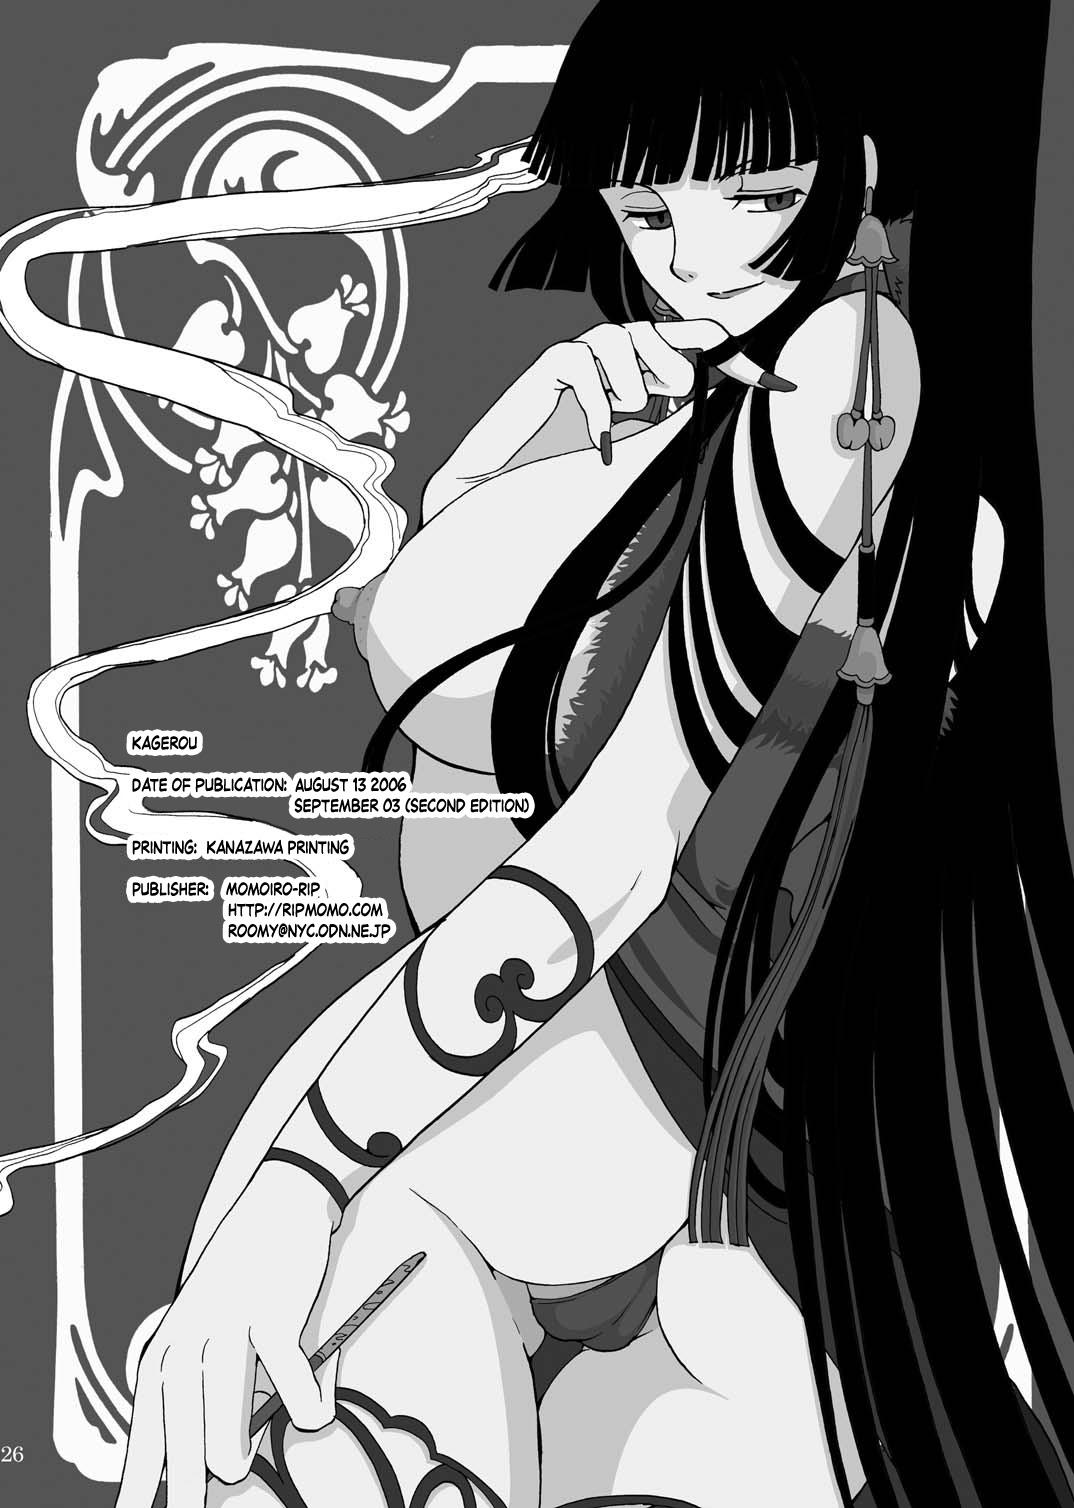 Spooning Kagerou - Xxxholic Parties - Page 26